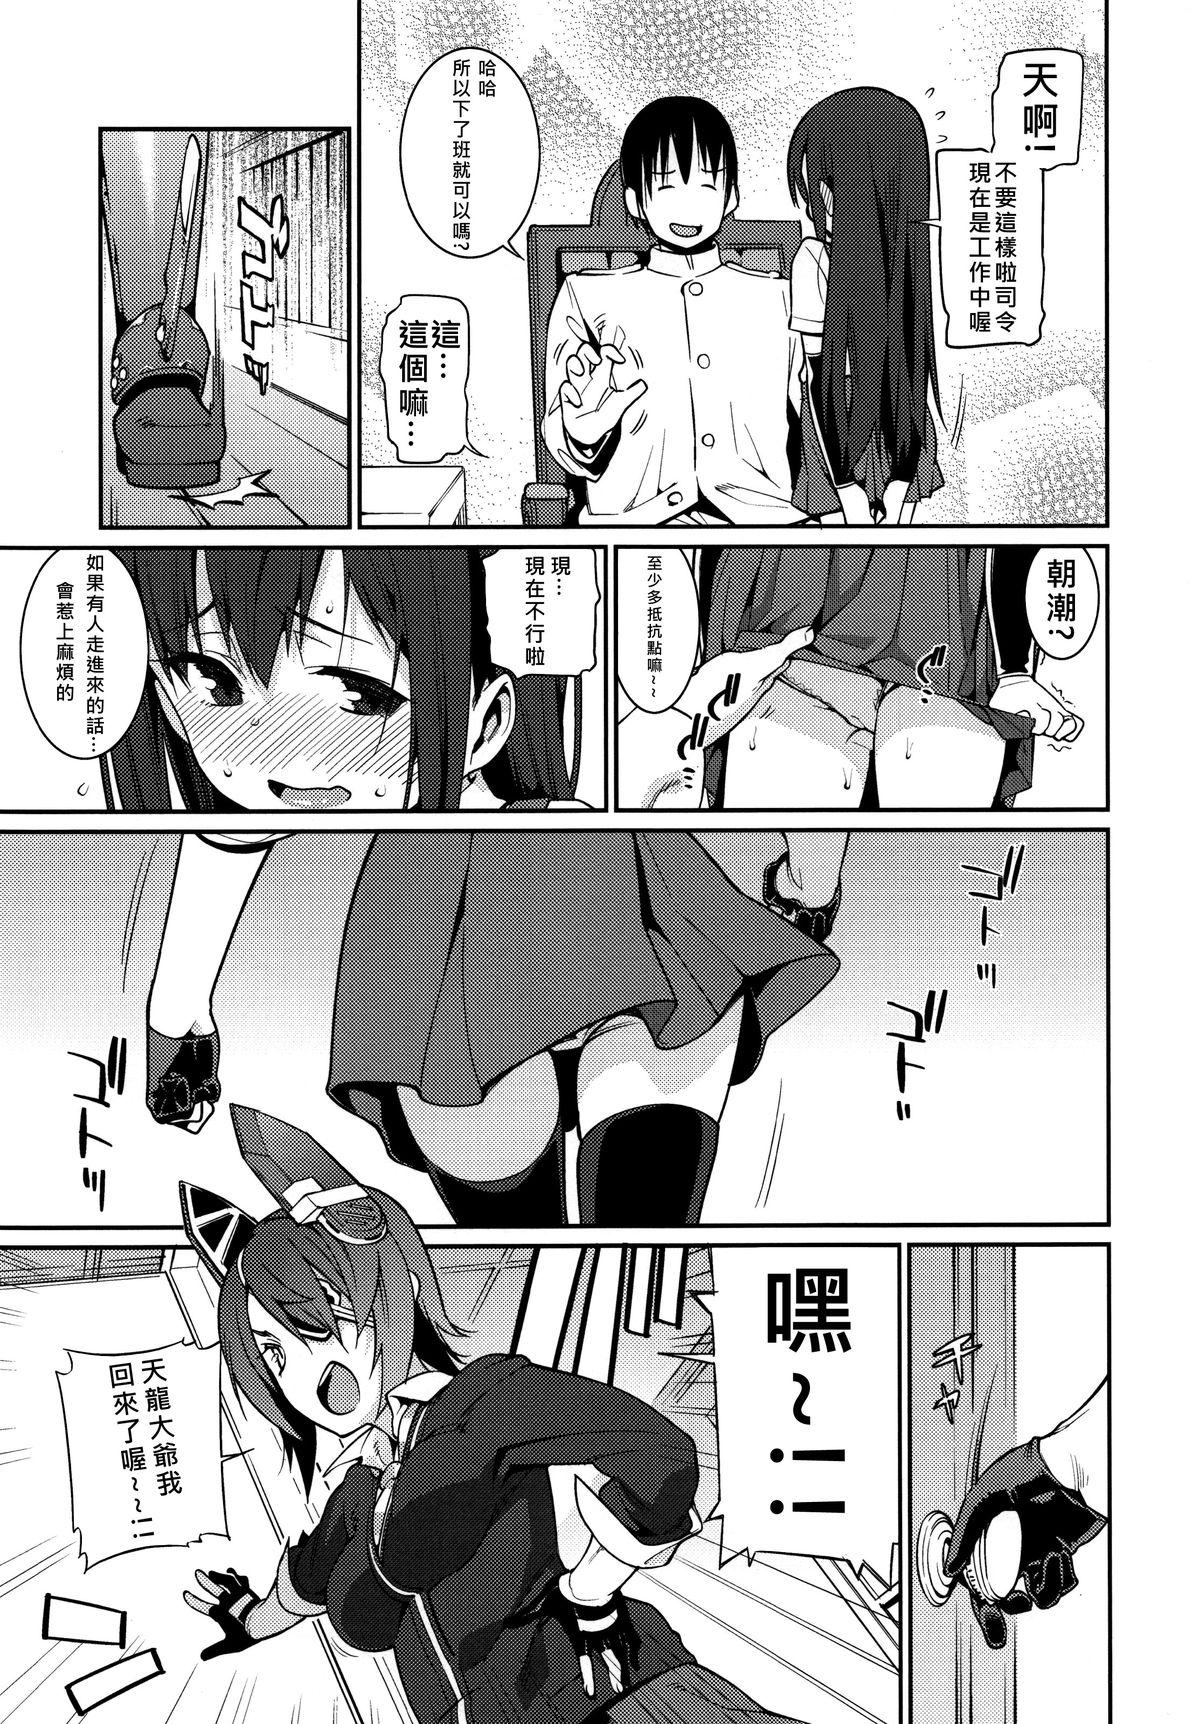 Com BRIEFINGS - Kantai collection Missionary Position Porn - Page 7